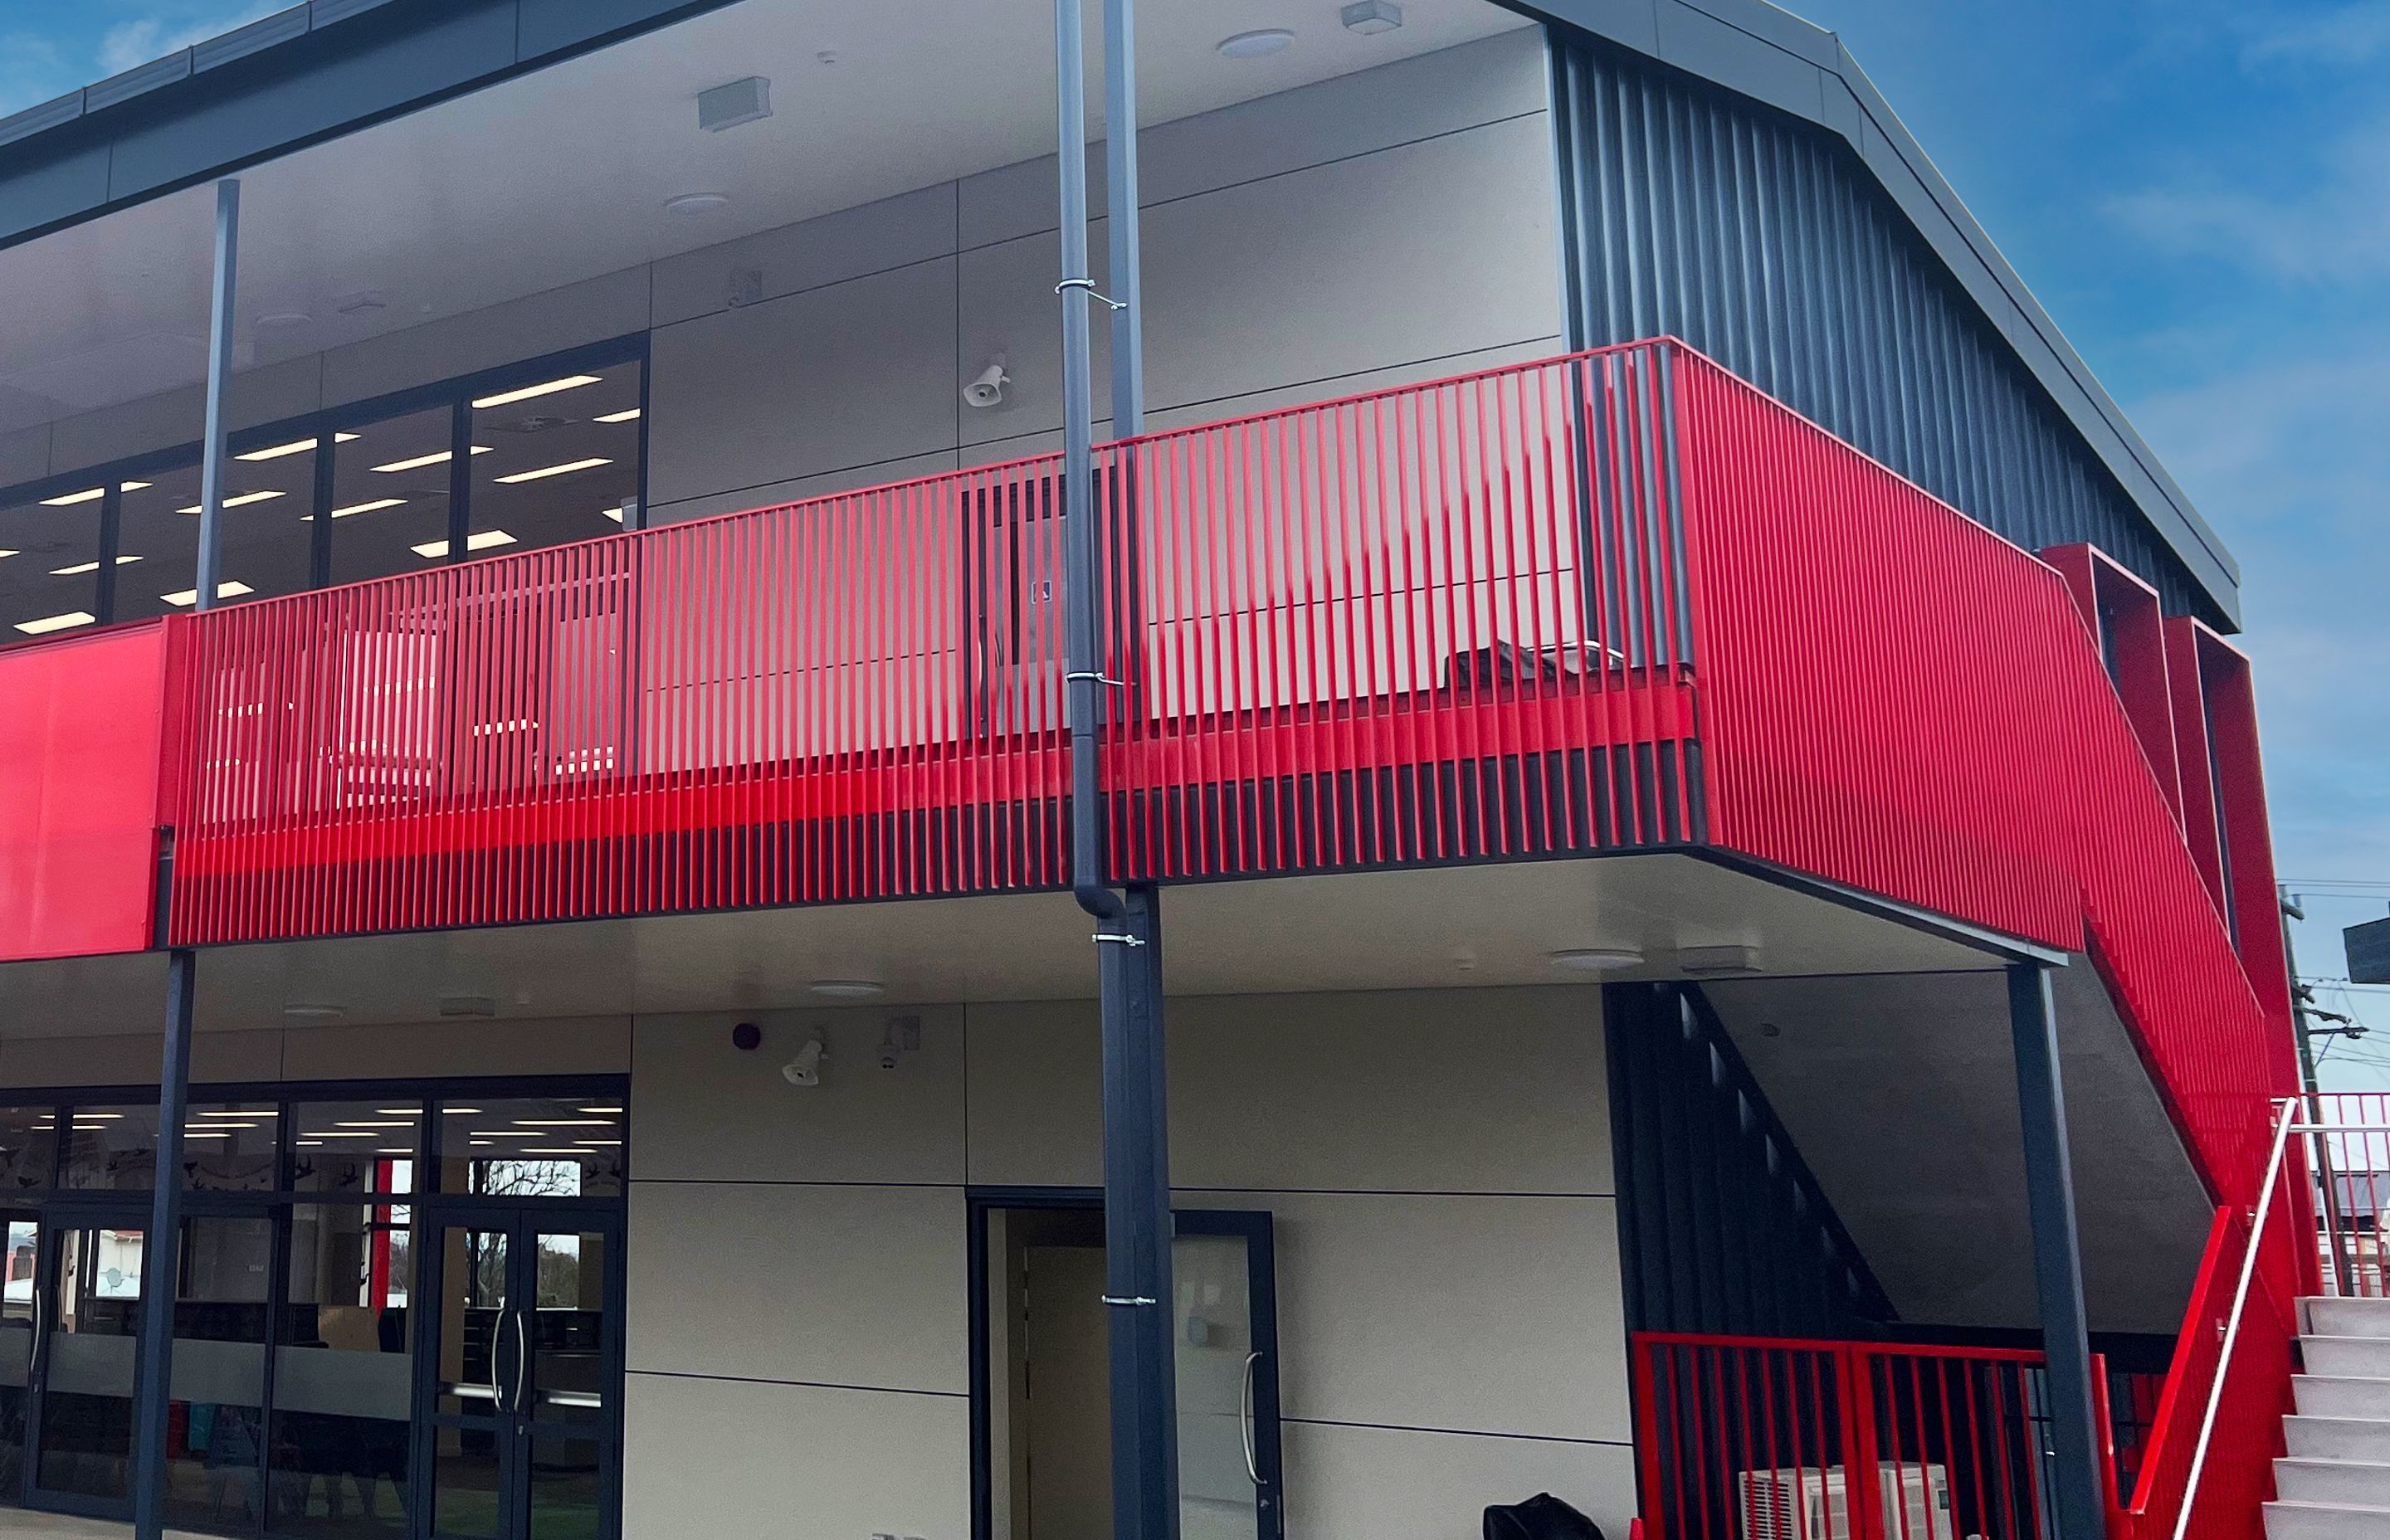 At Manurewa East School, UNEX worked with the architect to design solutions that were both structurally sound, and didn’t compromise on the look.